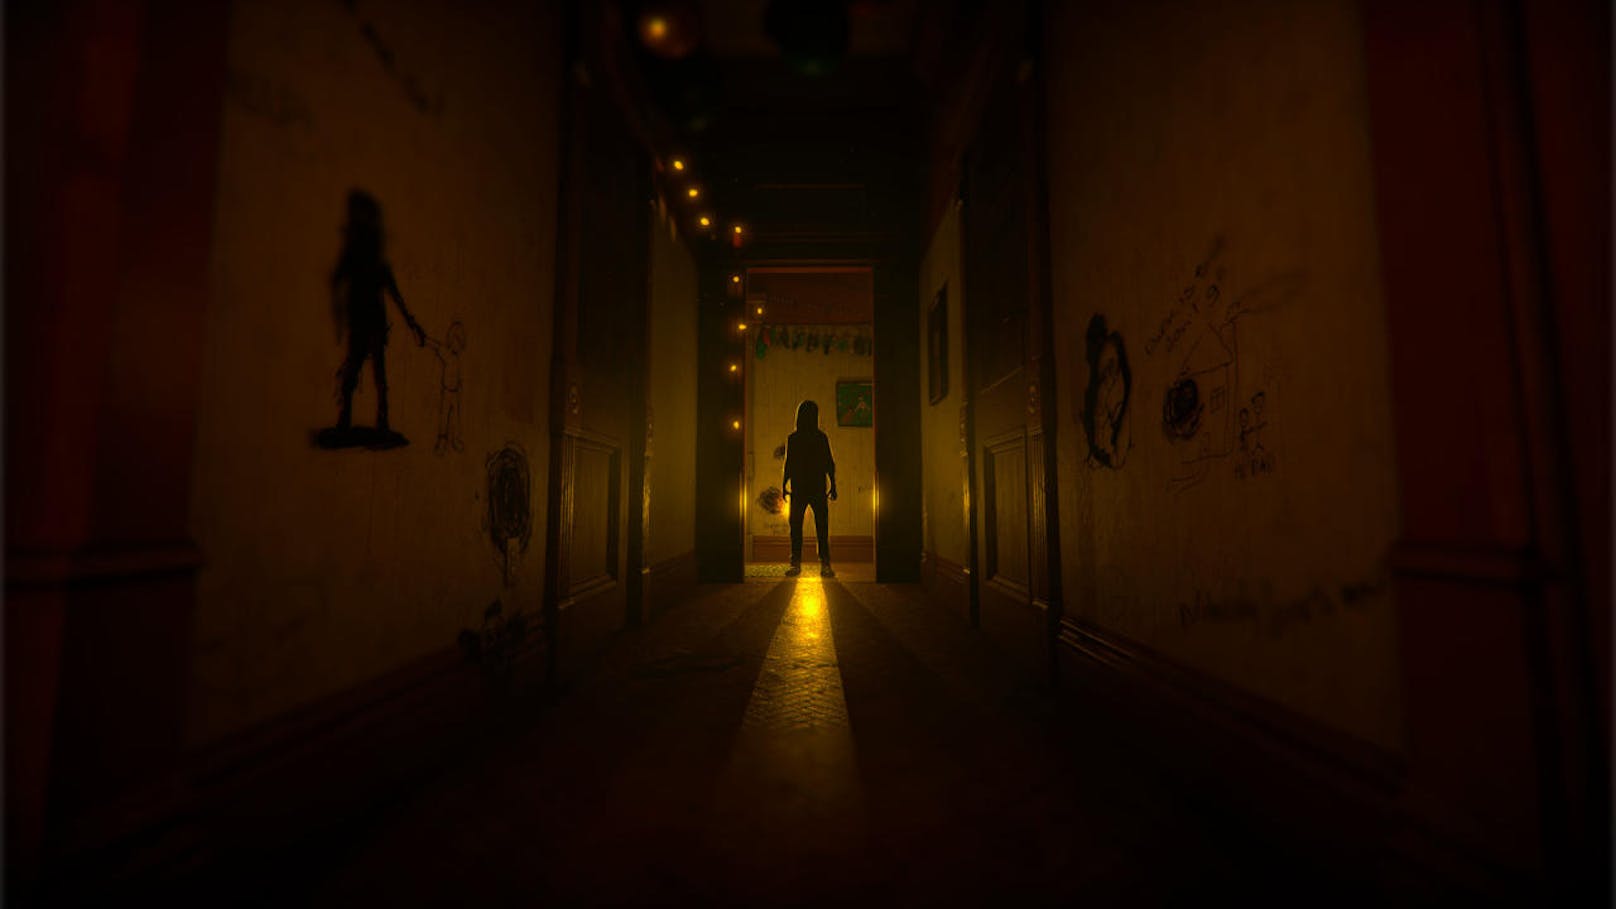  <a href="https://www.heute.at/digital/games/story/Transference-als-Psycho-Trip-in-die-Virtuelle-Welt-55166942" target="_blank">Transference</a>